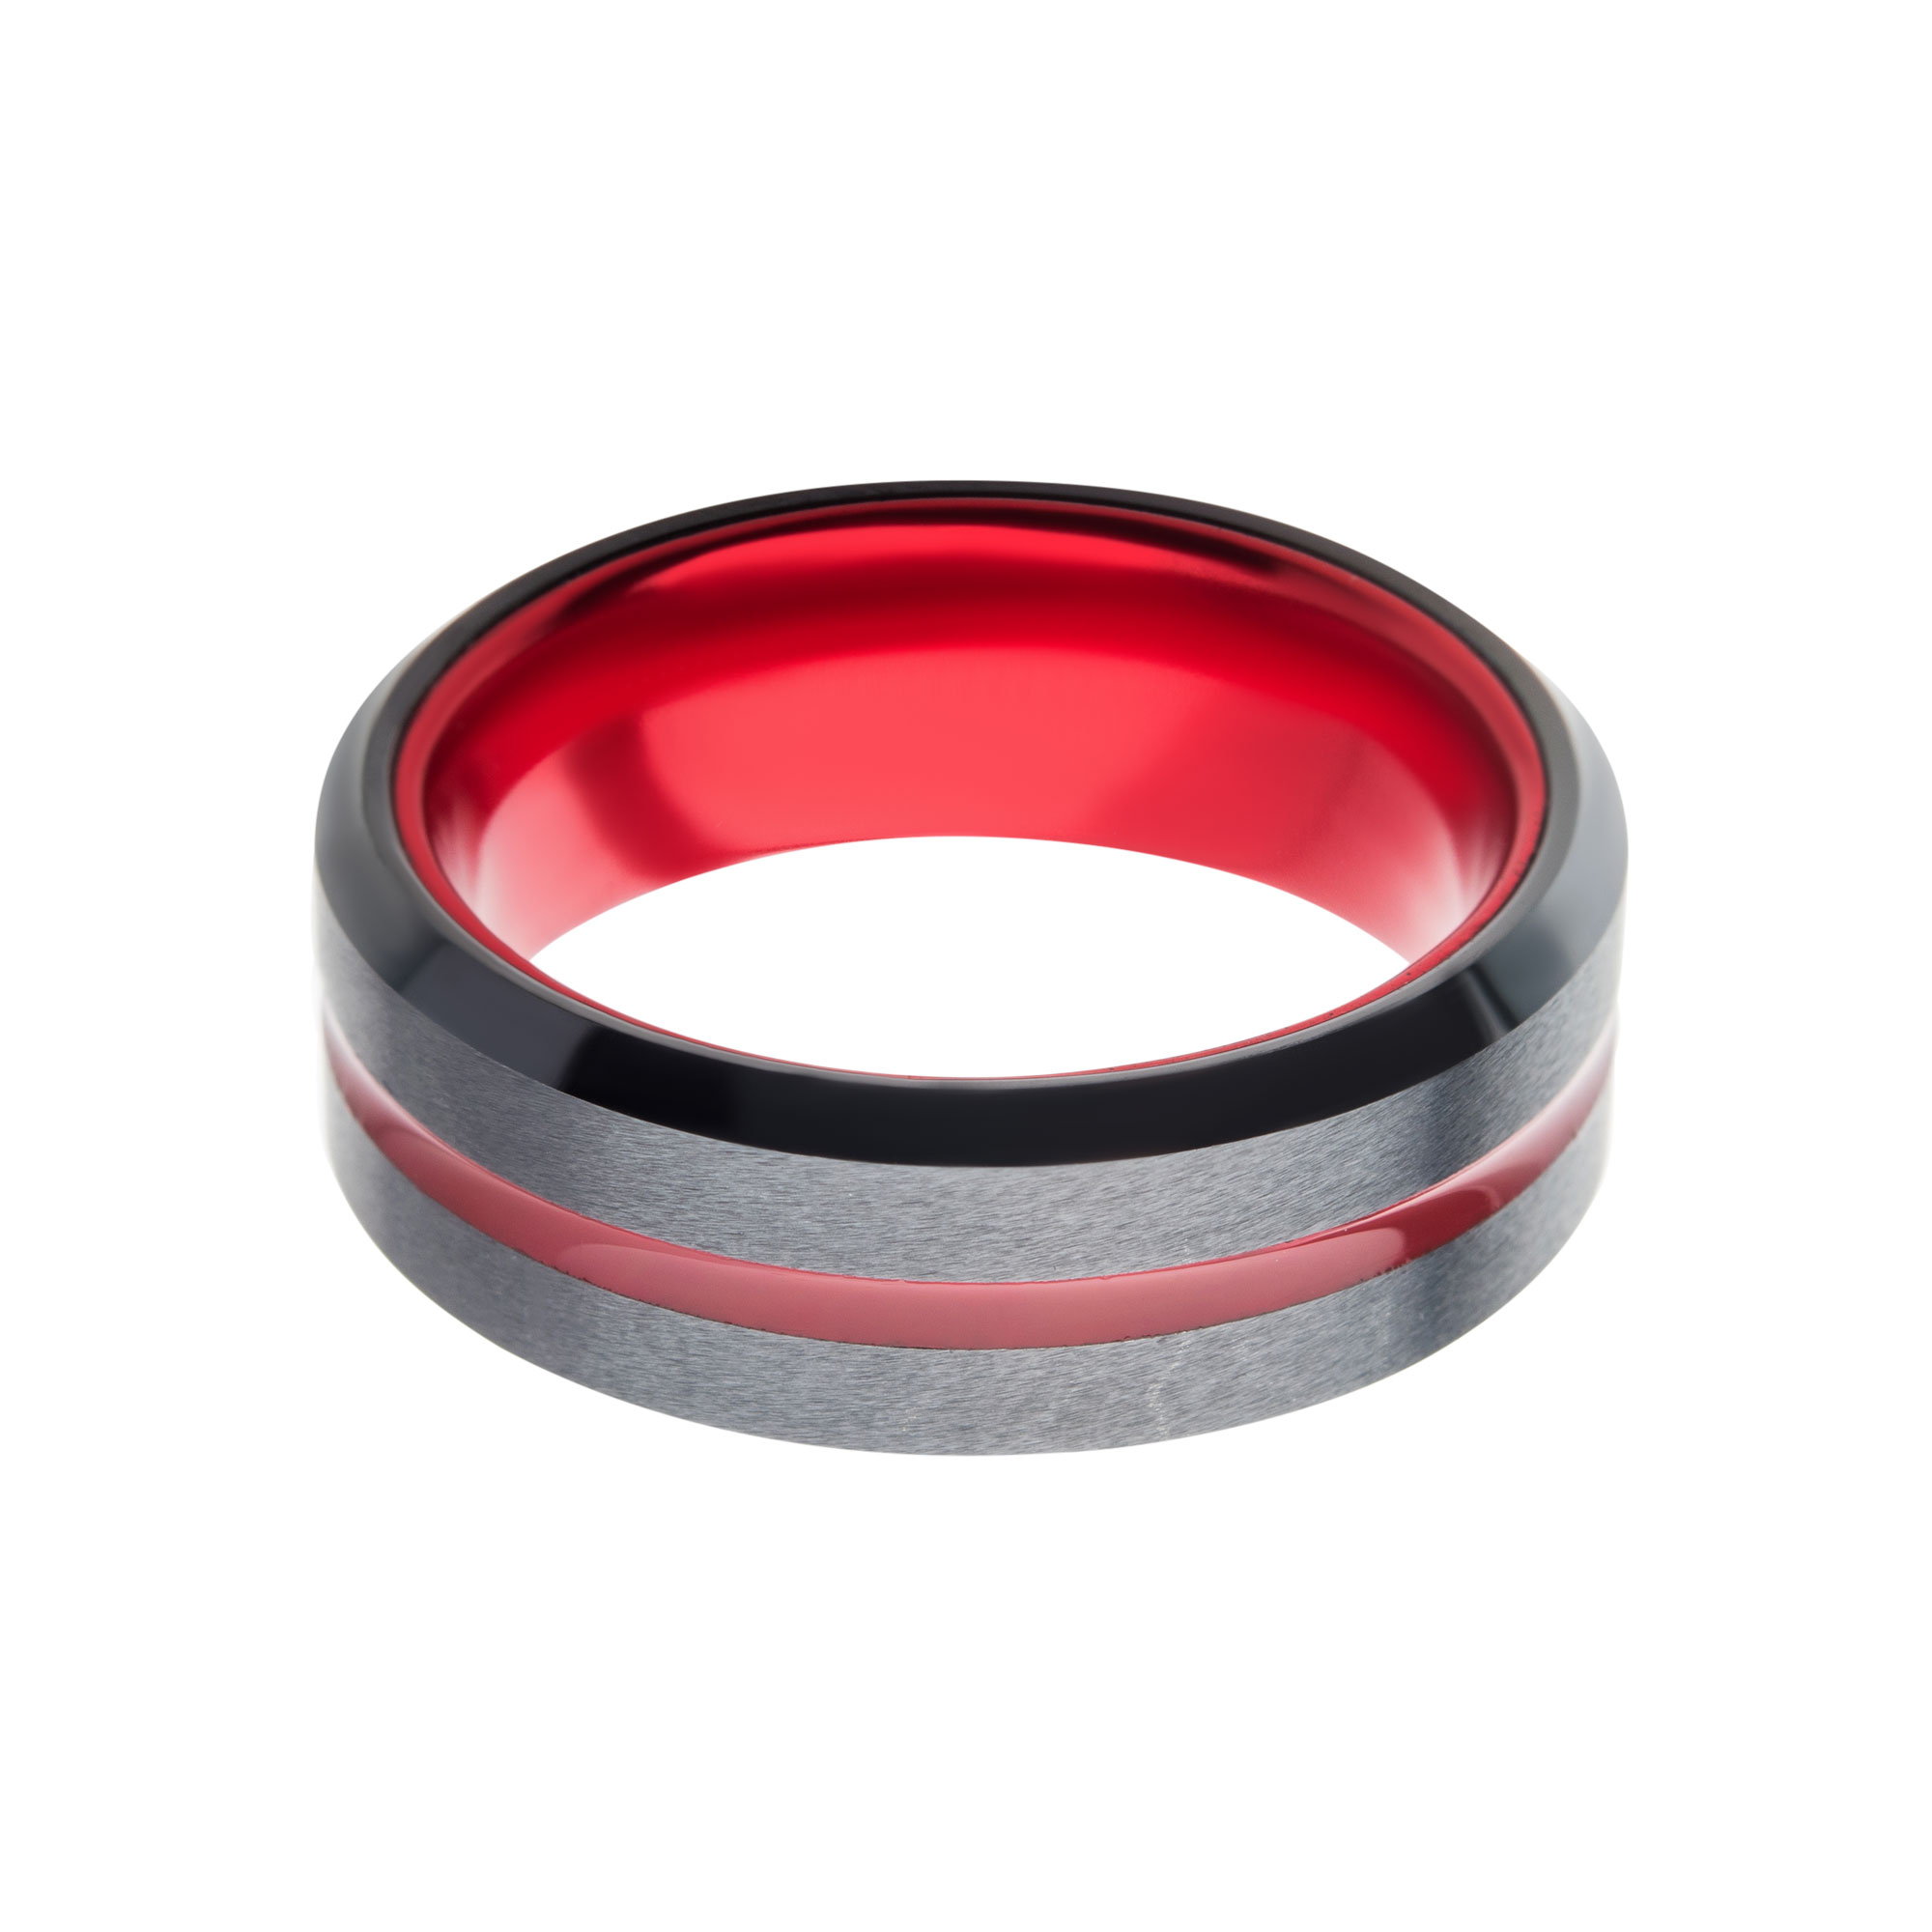 Steel Black Plated with Red Aluminum Beveled Wedding Band Ring Image 2 Midtown Diamonds Reno, NV